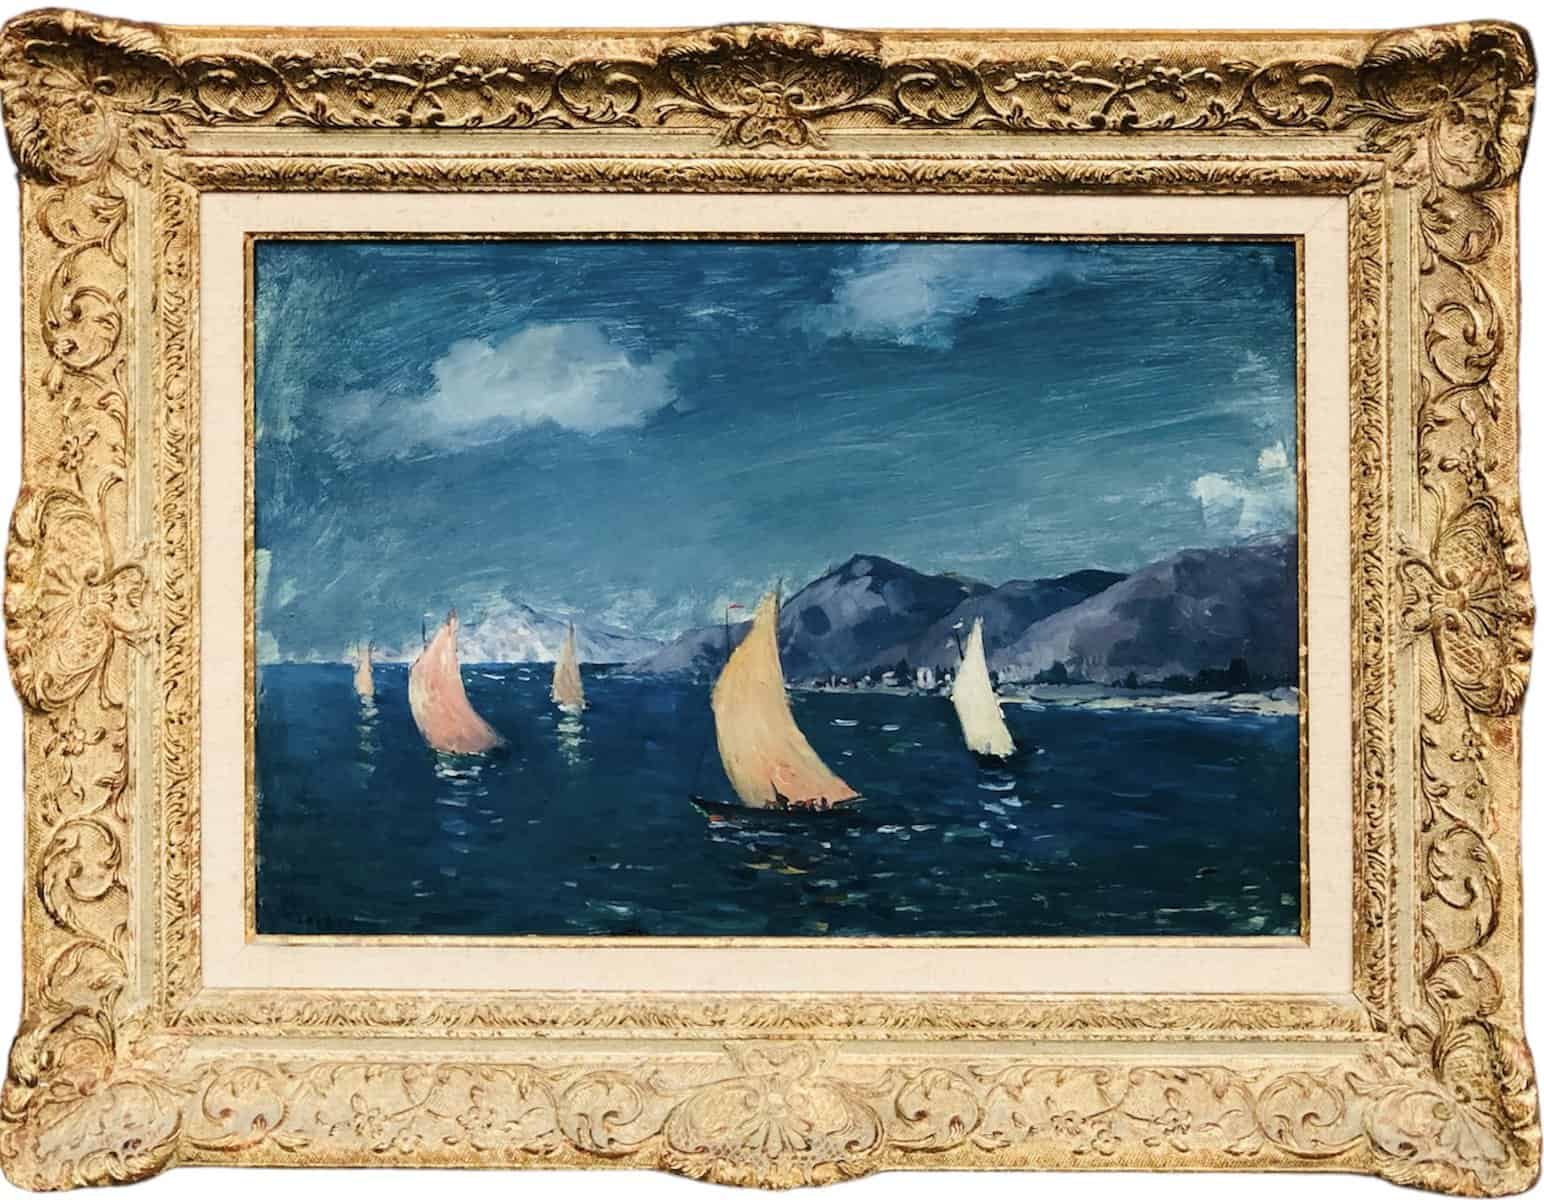 COSSON Marcel Painting 20th century Sailboats by the sea Oil on panel signed Certificate of authenticity.